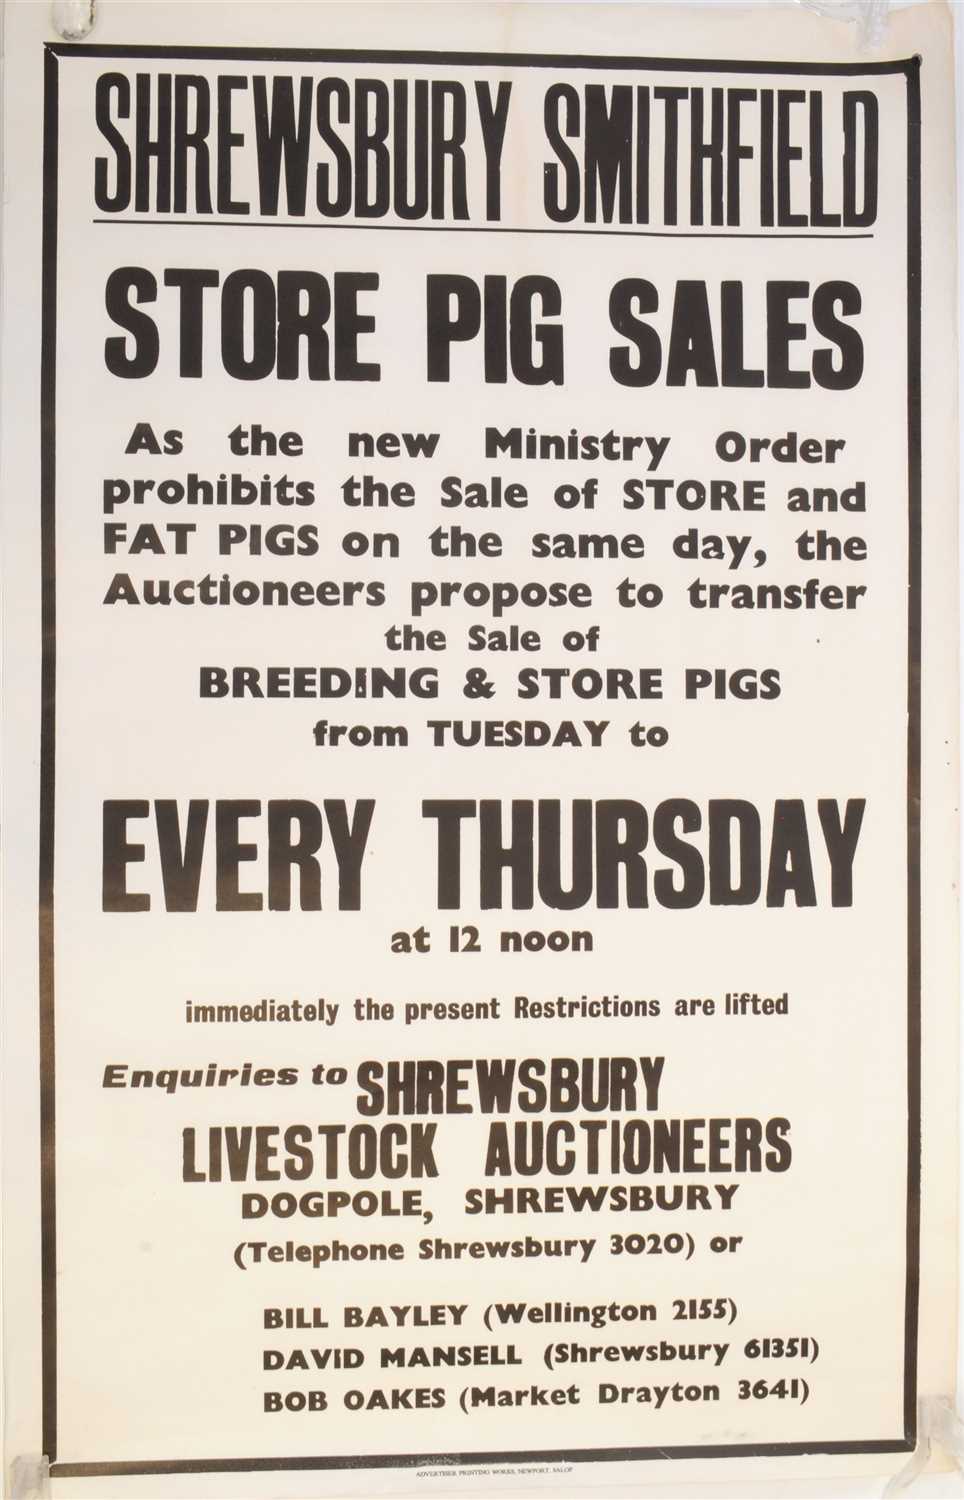 Lot 538 - Of local interest, a 20th century Shrewsbury Smithfield 'Store Pig Sales' auction poster